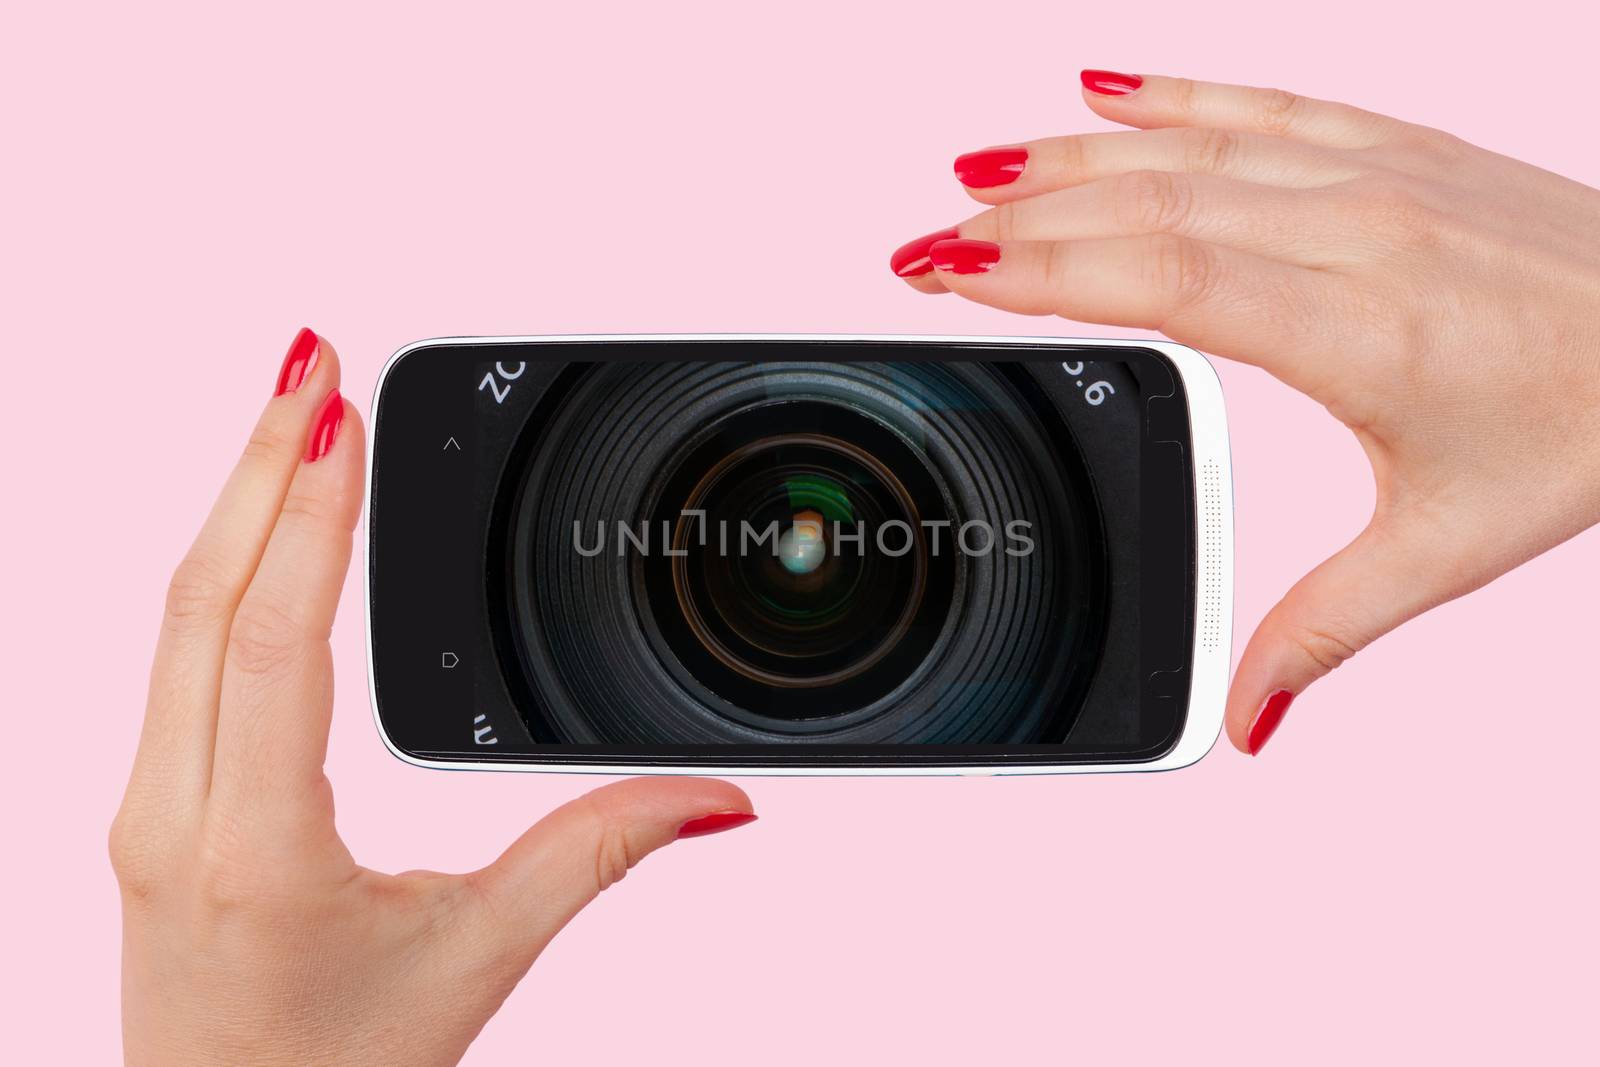 Selfie. Female hands with red nails holding smartphone with optical lens on screen. Modern social media picture communication.